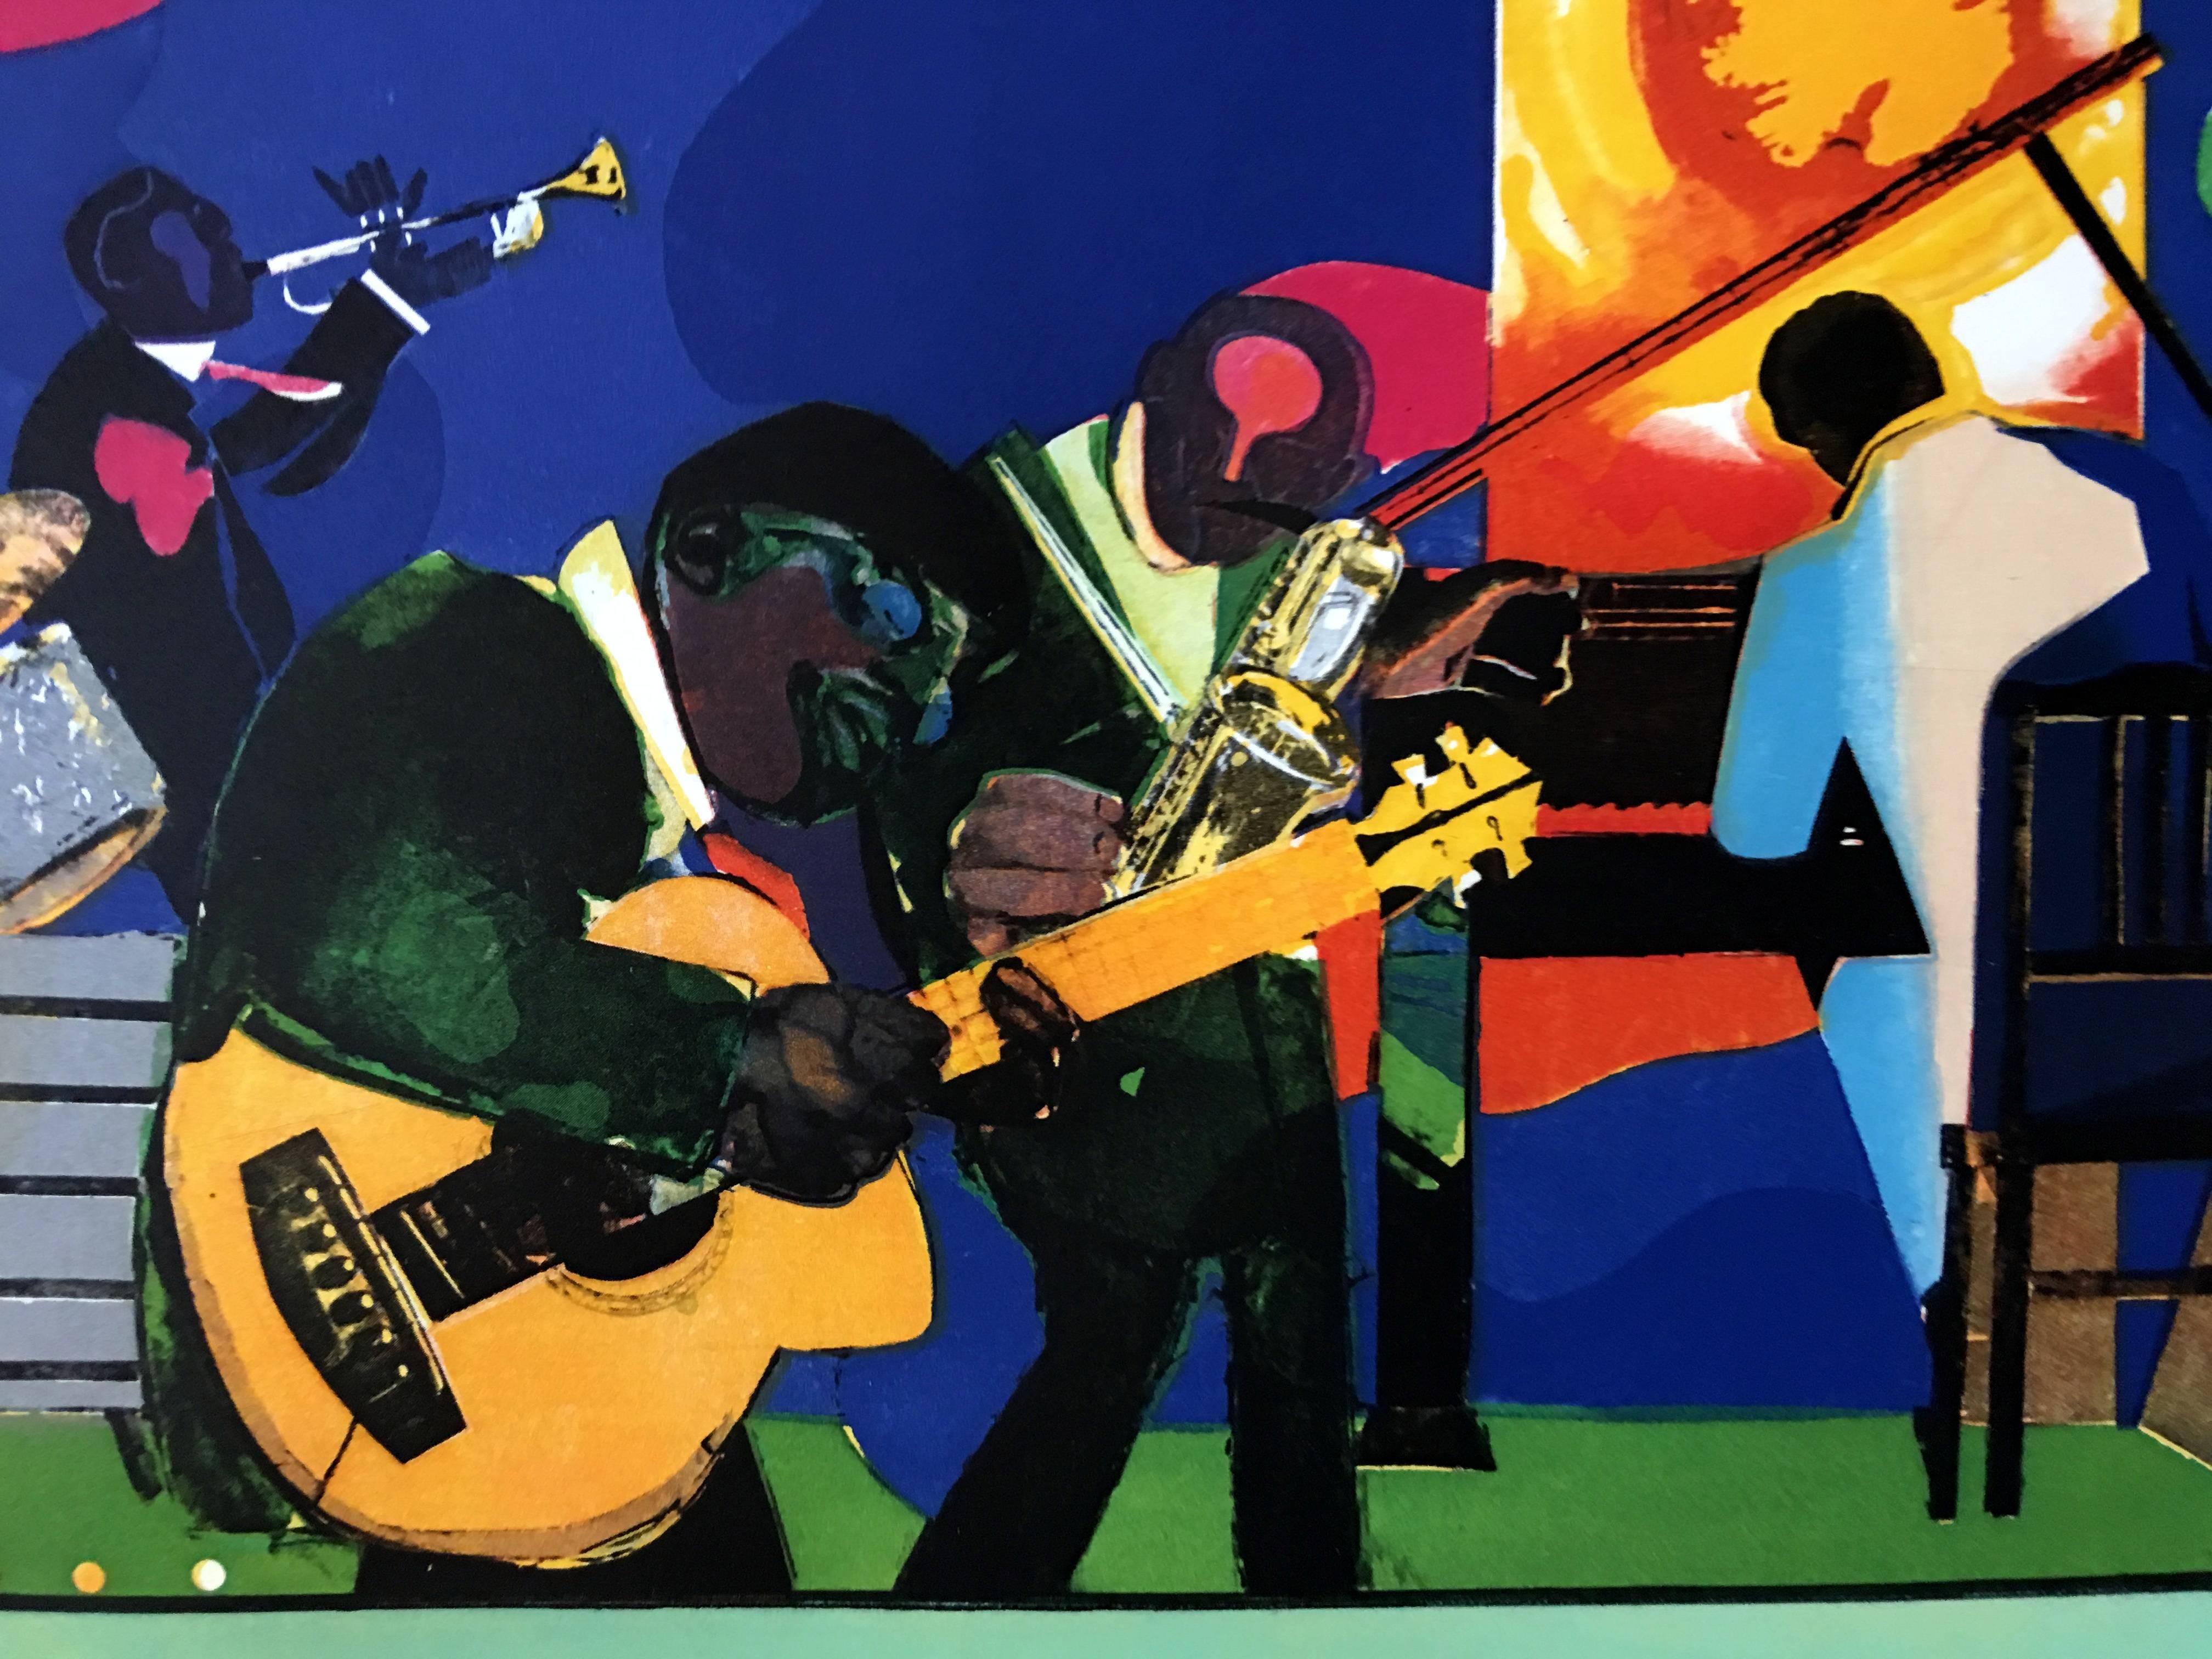 Jamming at the Savoy - Print by Romare Bearden